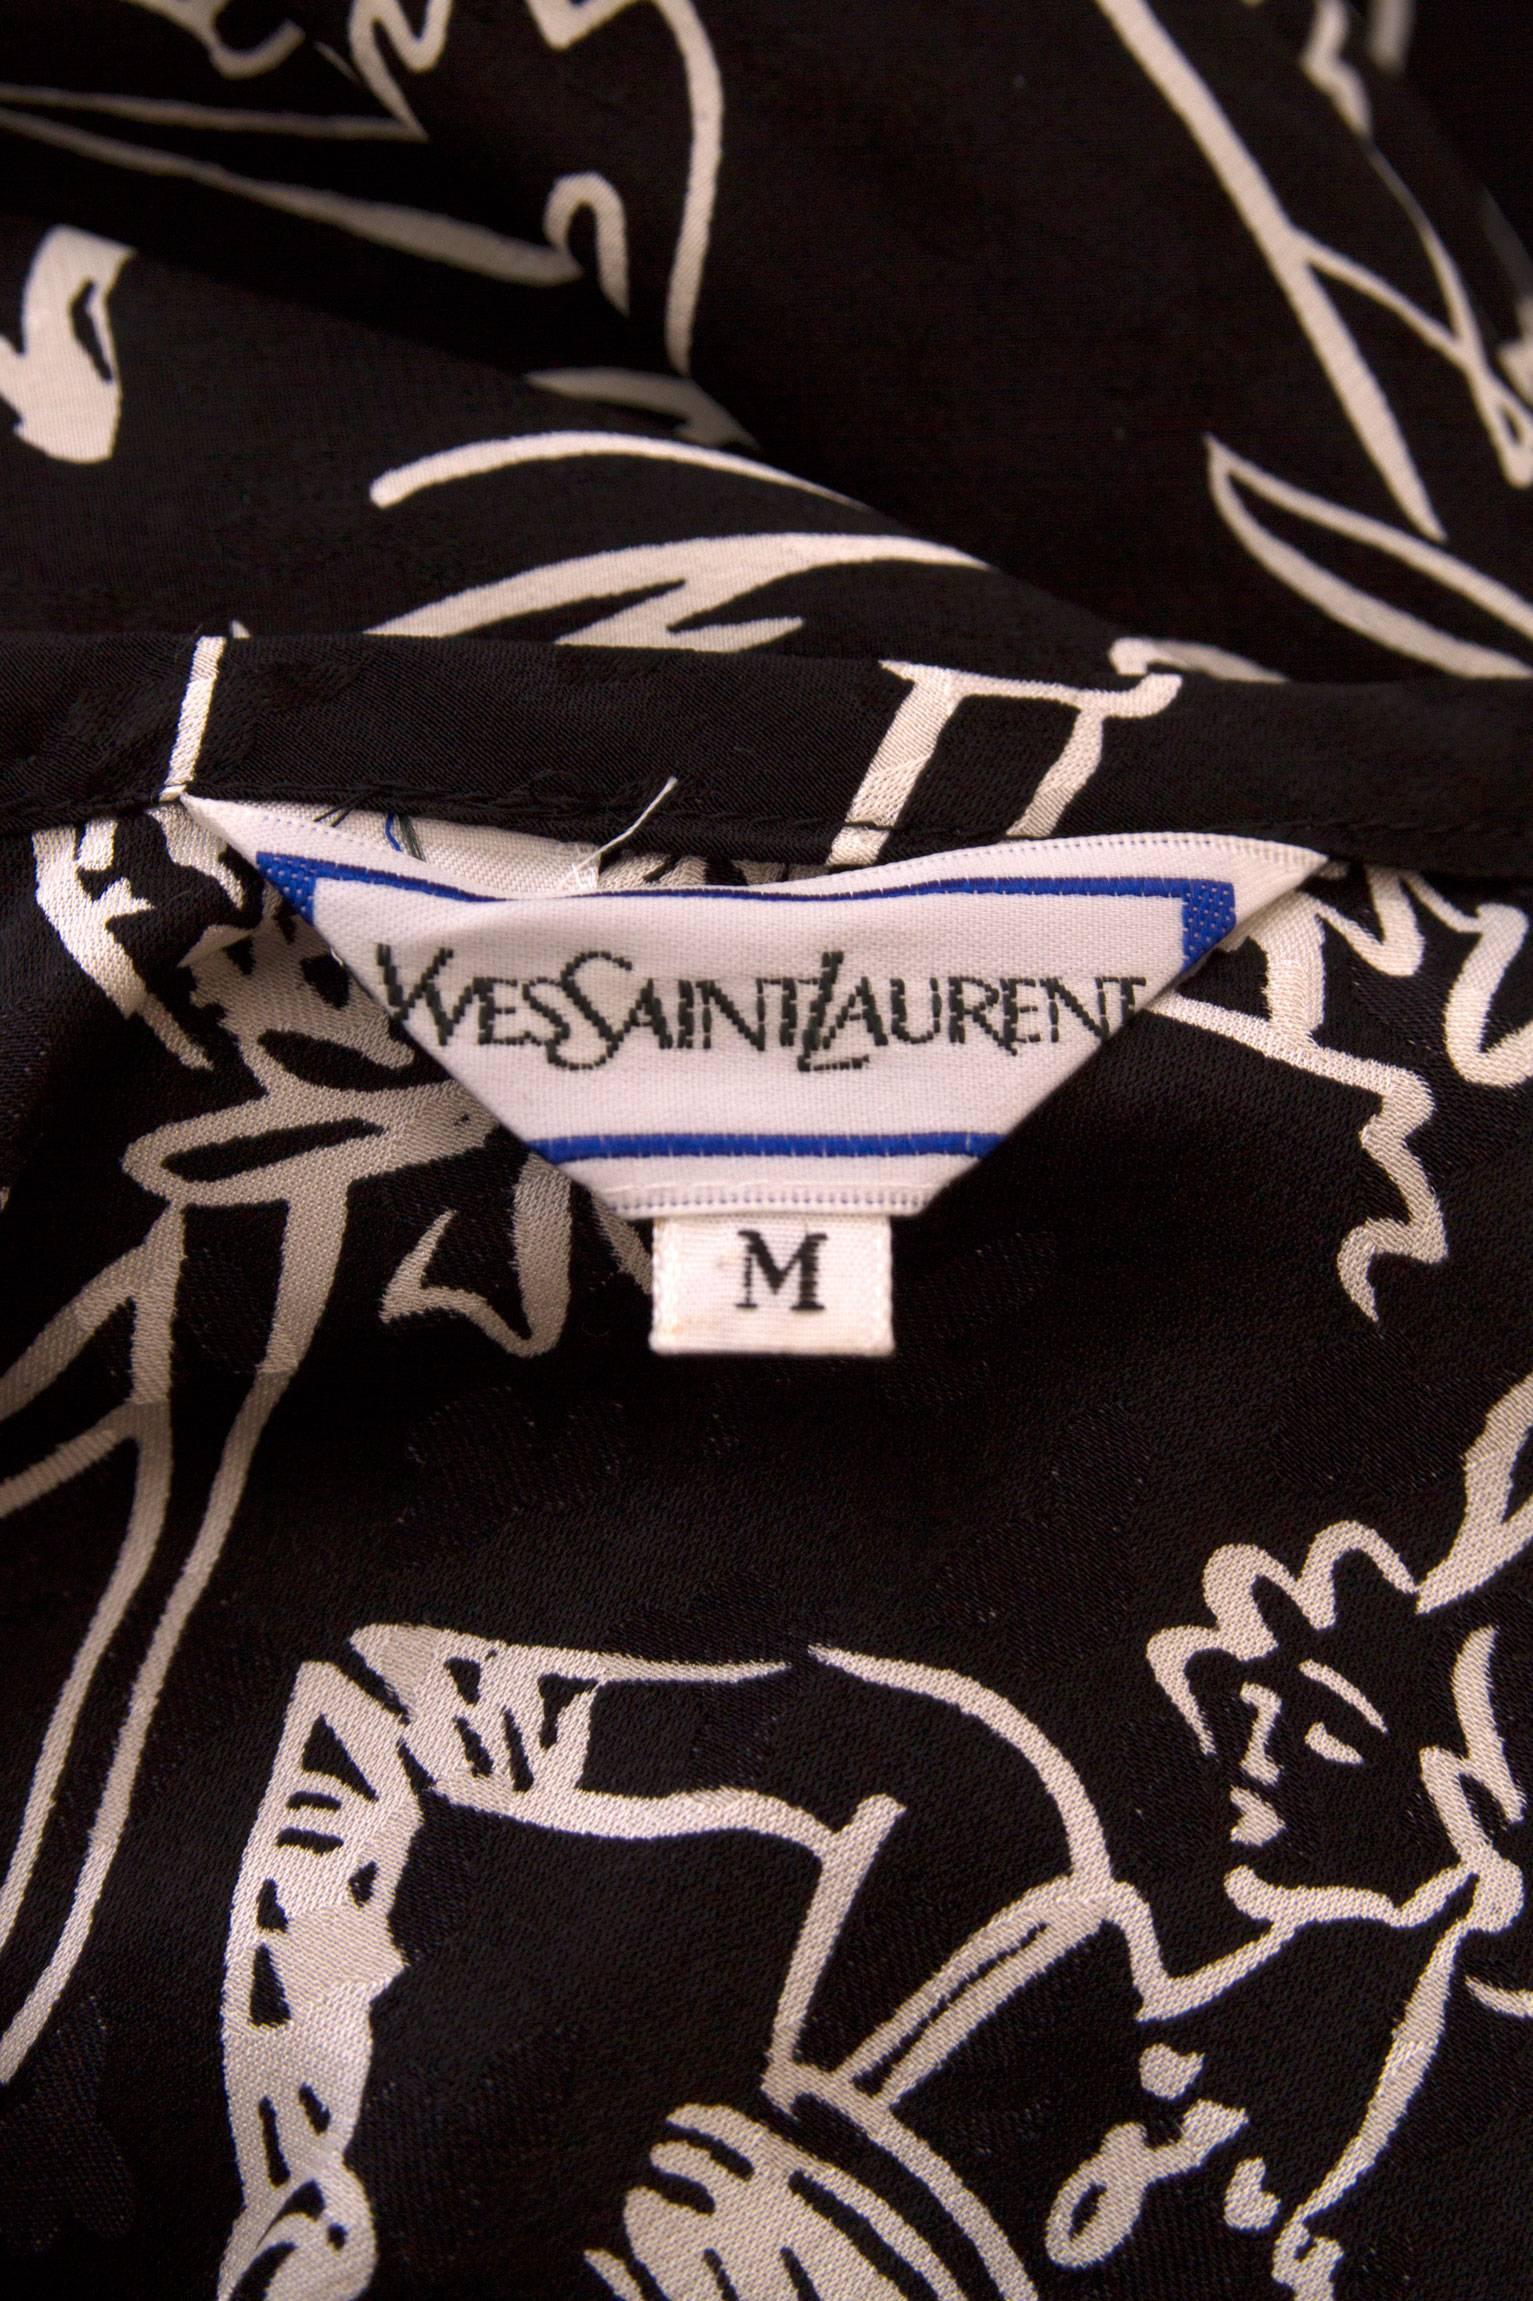 A gorgeous black 1980s Yves Saint Laurent summer day dress with a full skirt and short sleeves. The loosely fitted dress can be held together at the waist by a detachable matching waist belt, which can be tied around the waistline. The jacquard